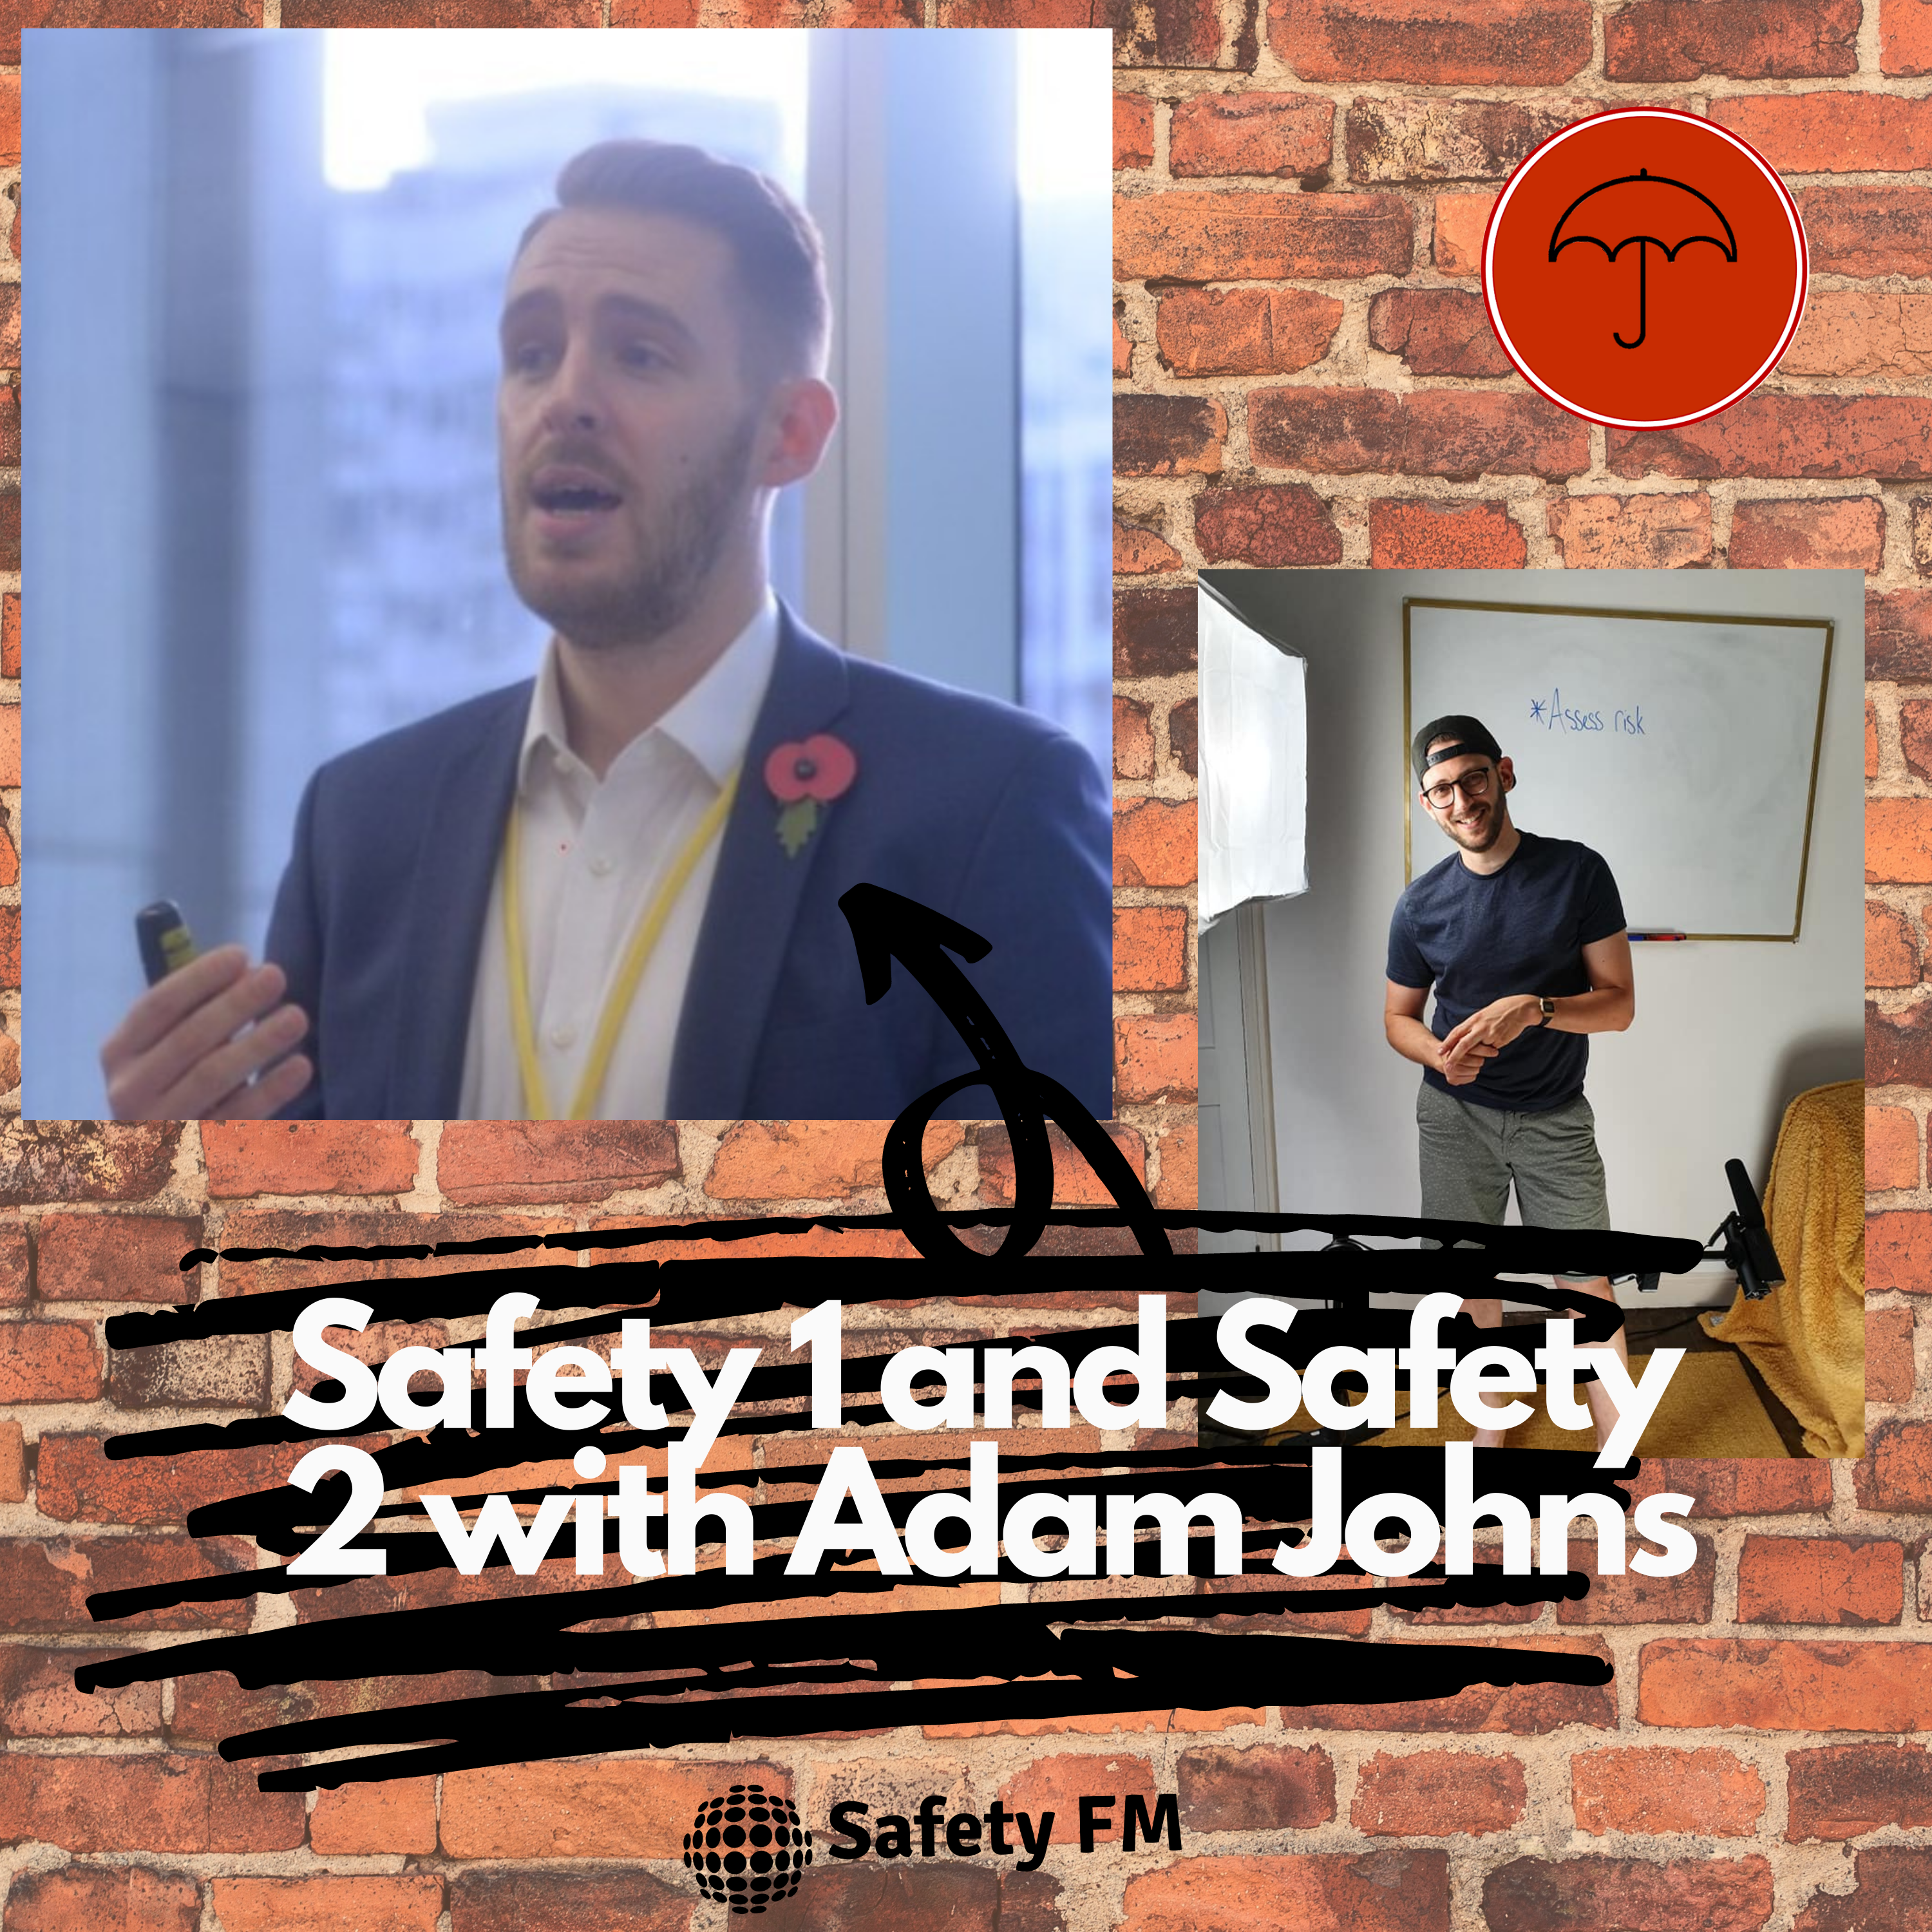 Safety 1 and Safety 2 With Adam Johns